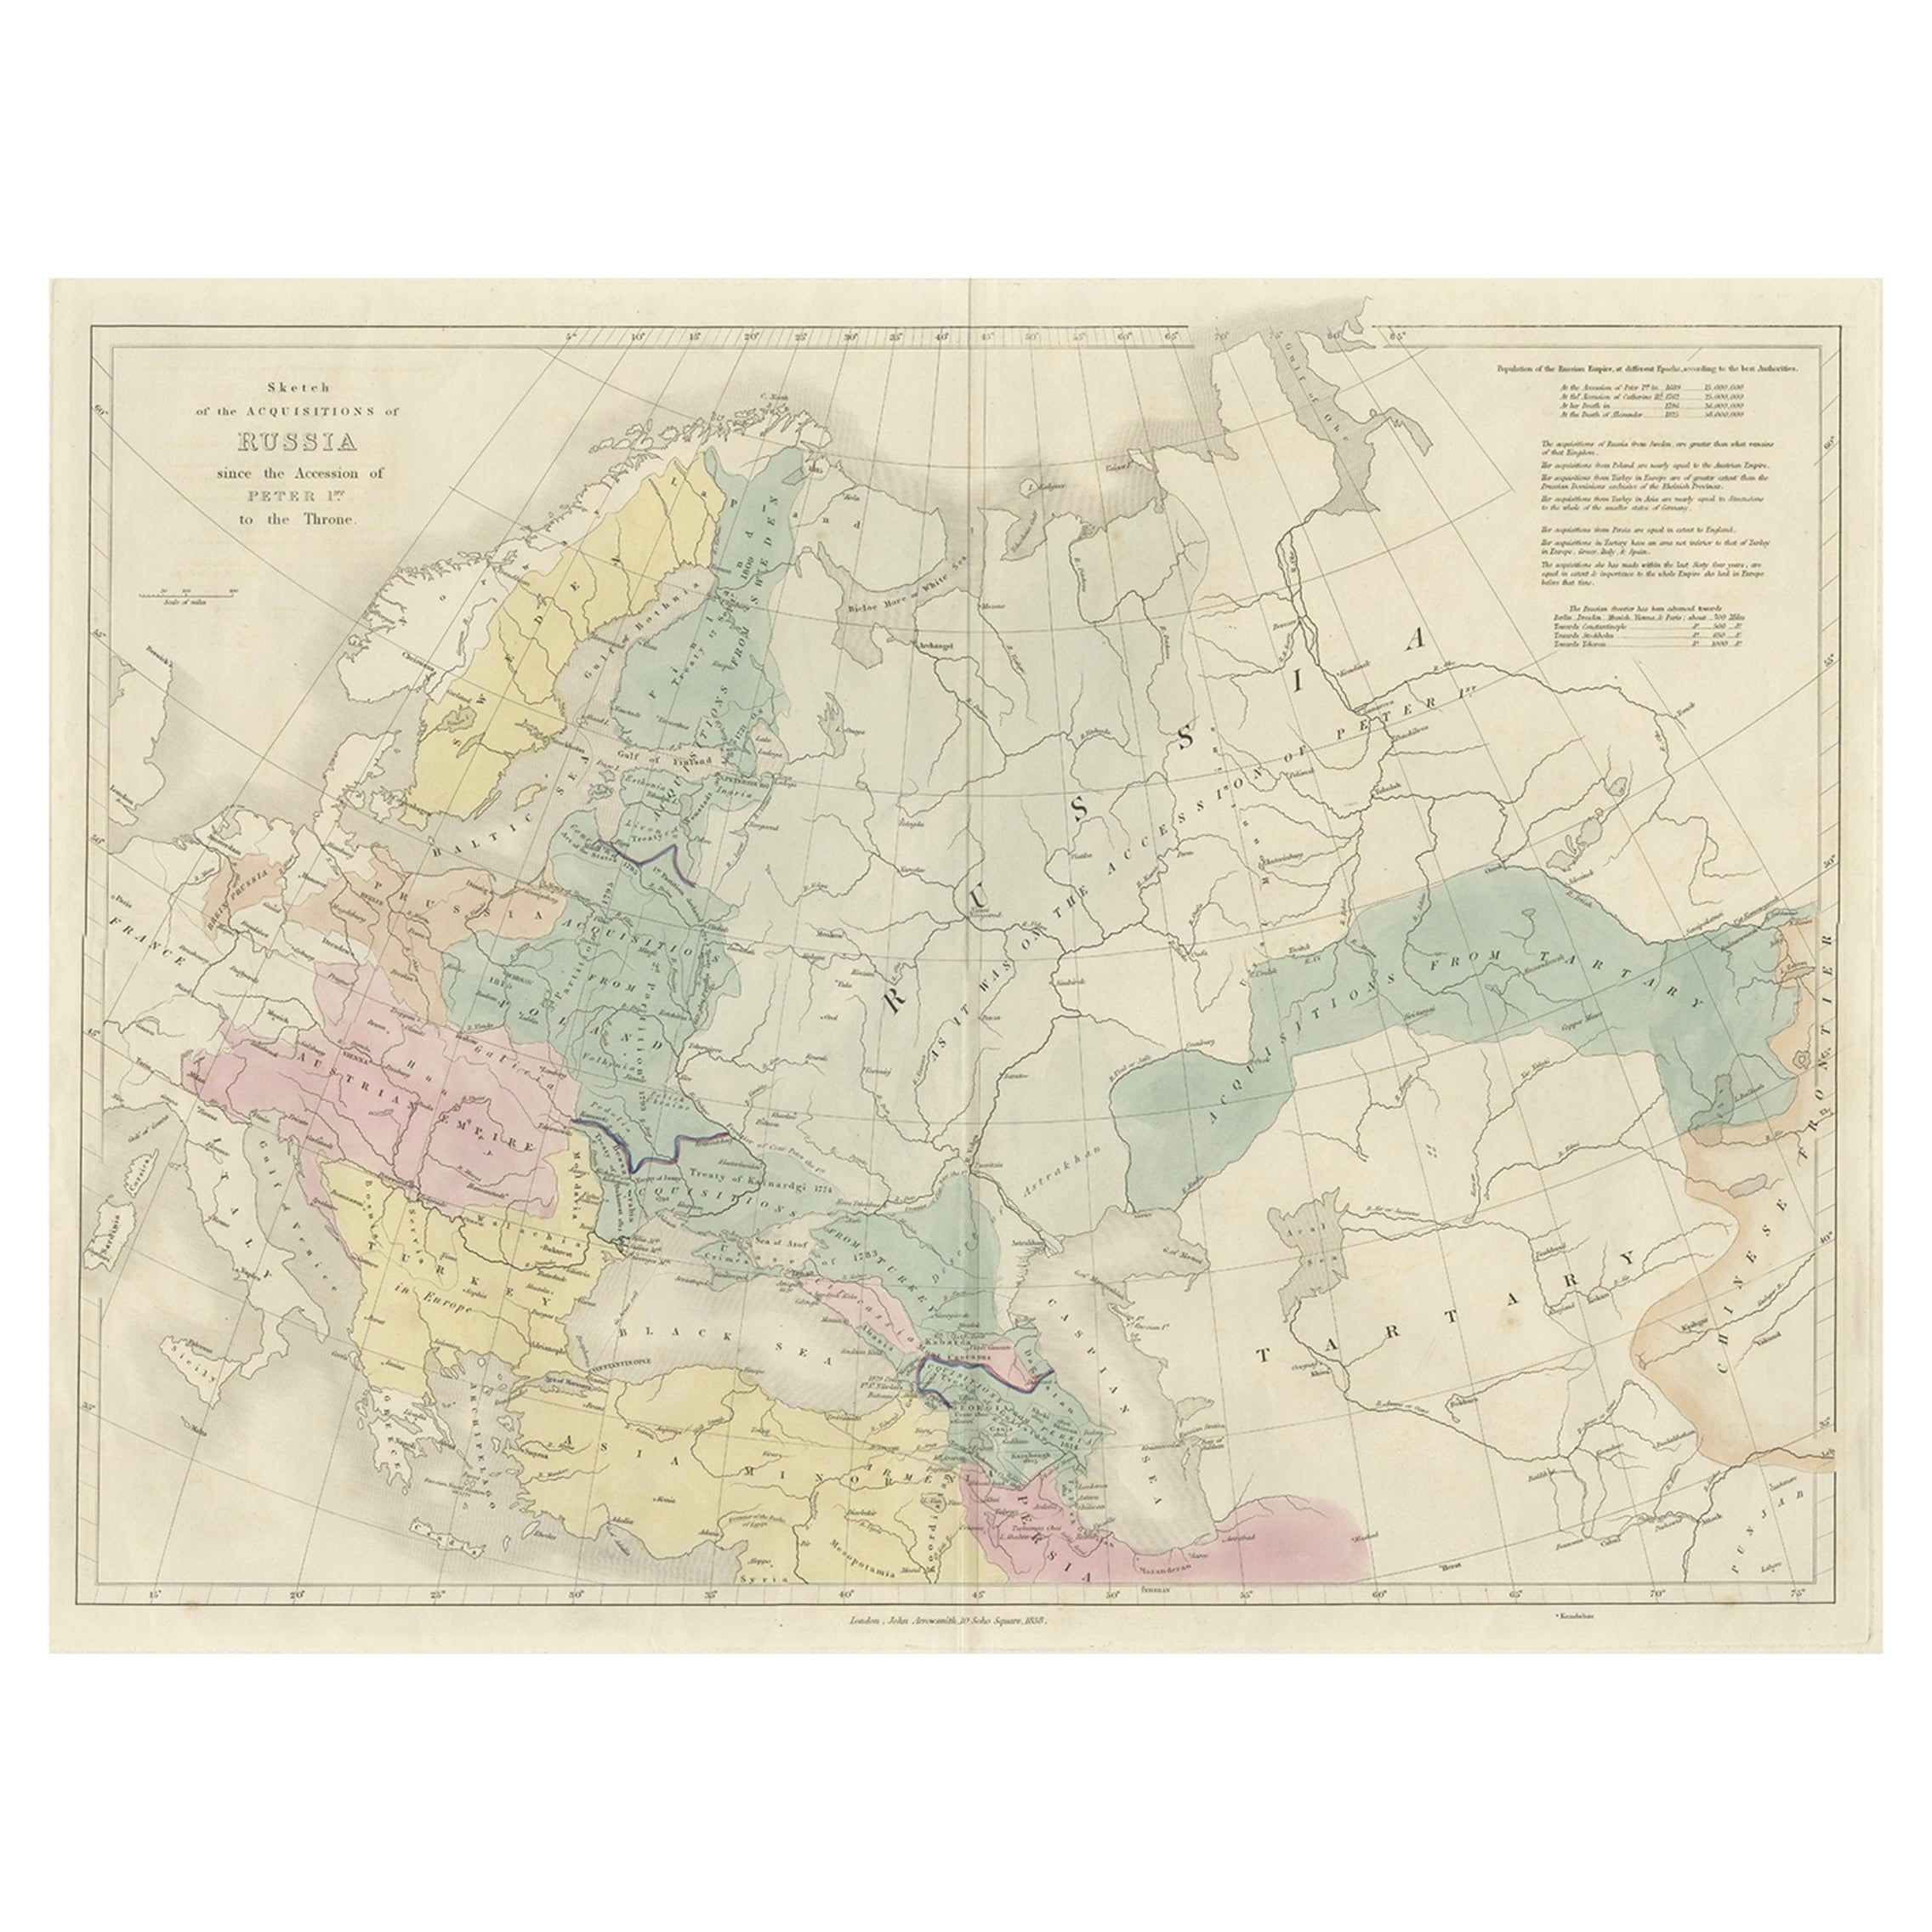 Historical Antique Map of Russia, Examining the History of Russia, 1838